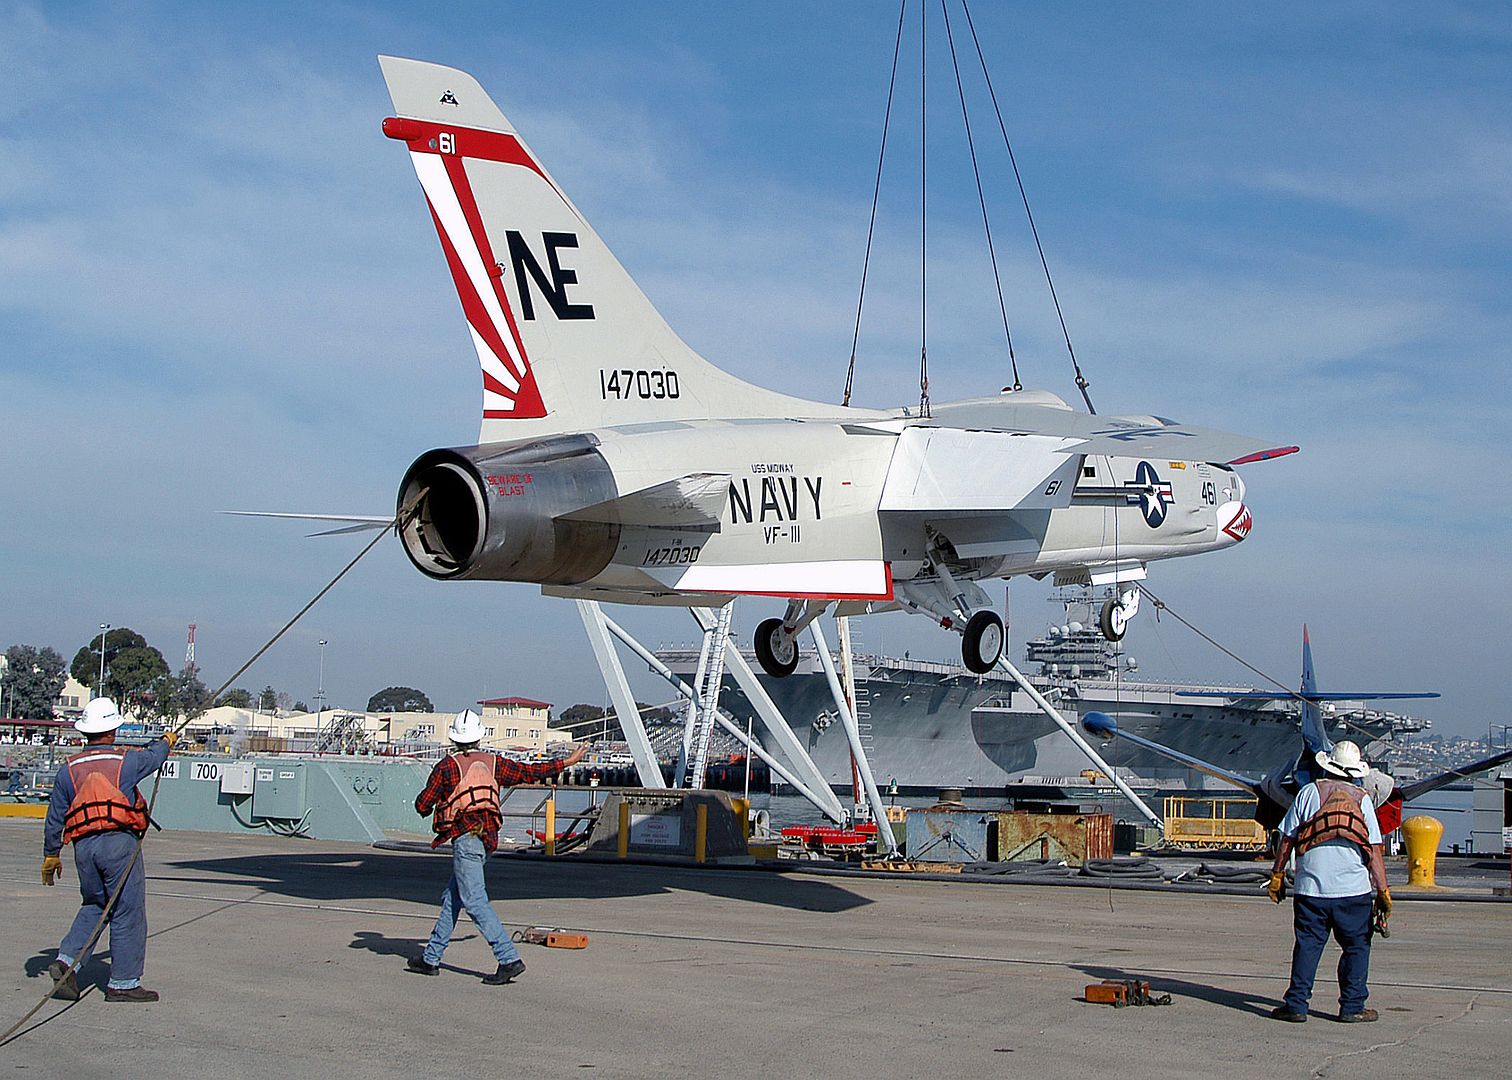 8K Crusader Aircraft Onto A Floating Barge In The Harbor At San Diego